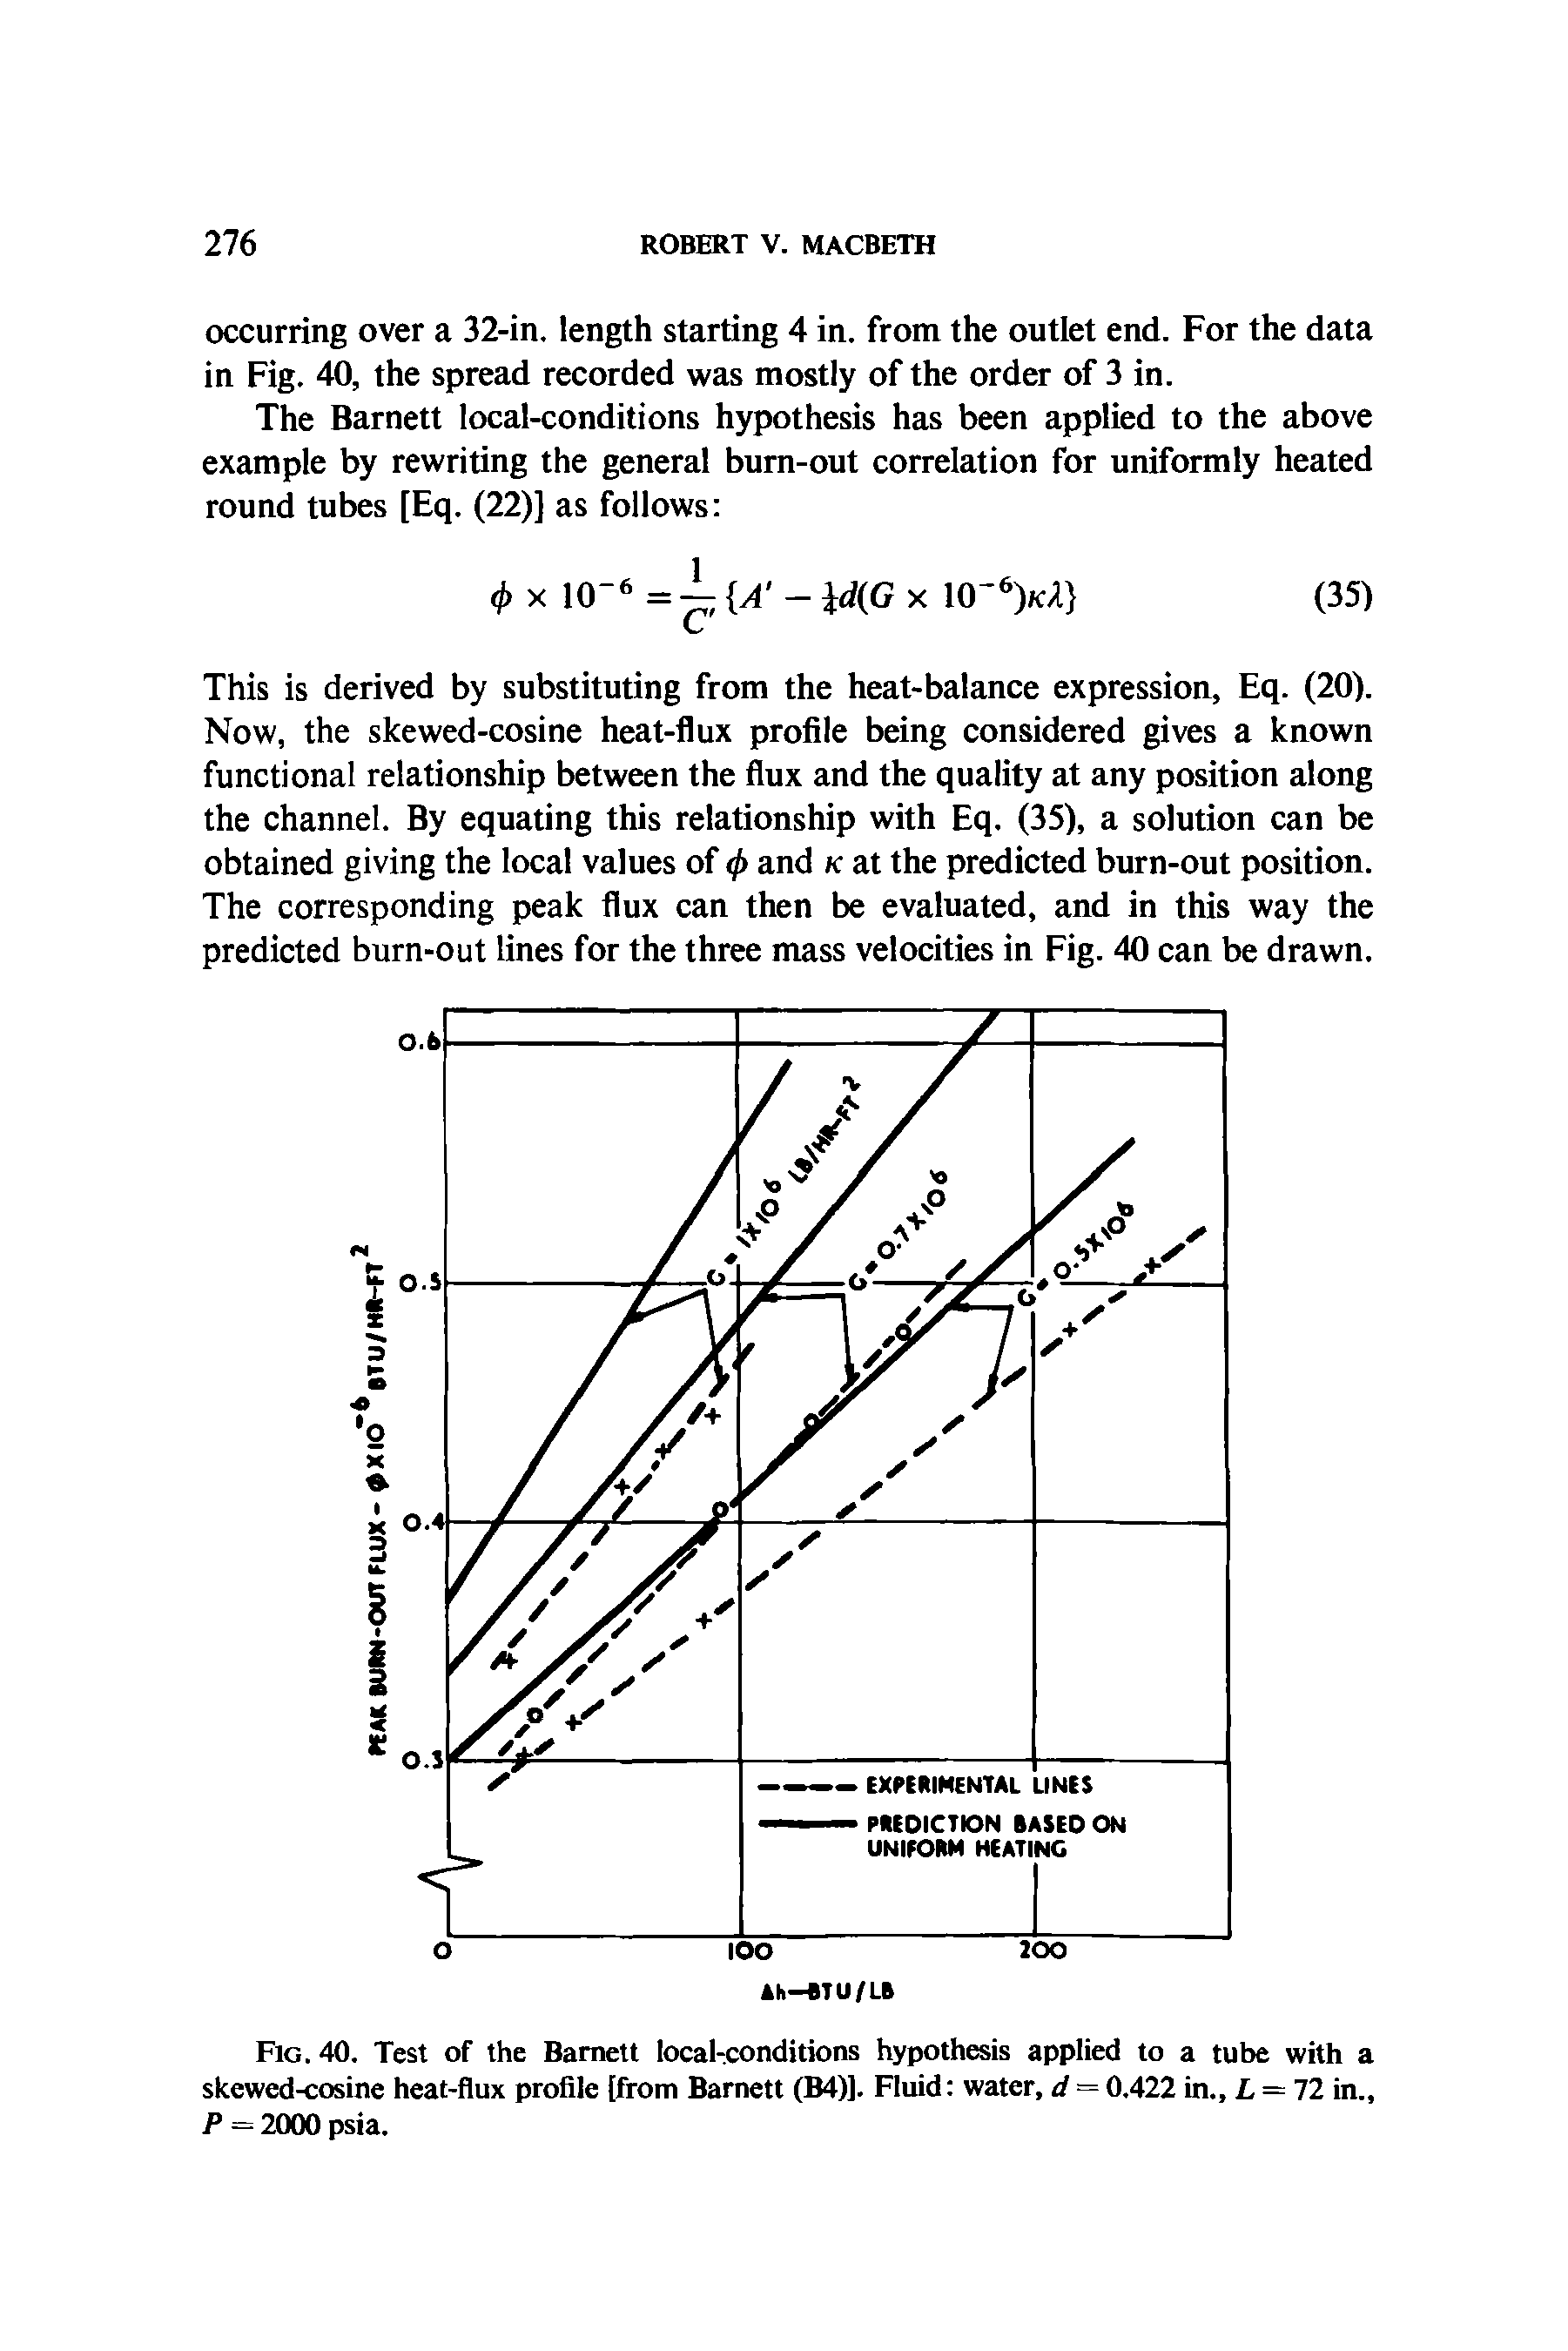 Fig. 40. Test of the Barnett local-conditions hypothesis applied to a tube with a skewed-cosine heat-flux profile [from Barnett (B4)]. Fluid water, d = 0.422 in., L — 12 in., P = 2000 psia.